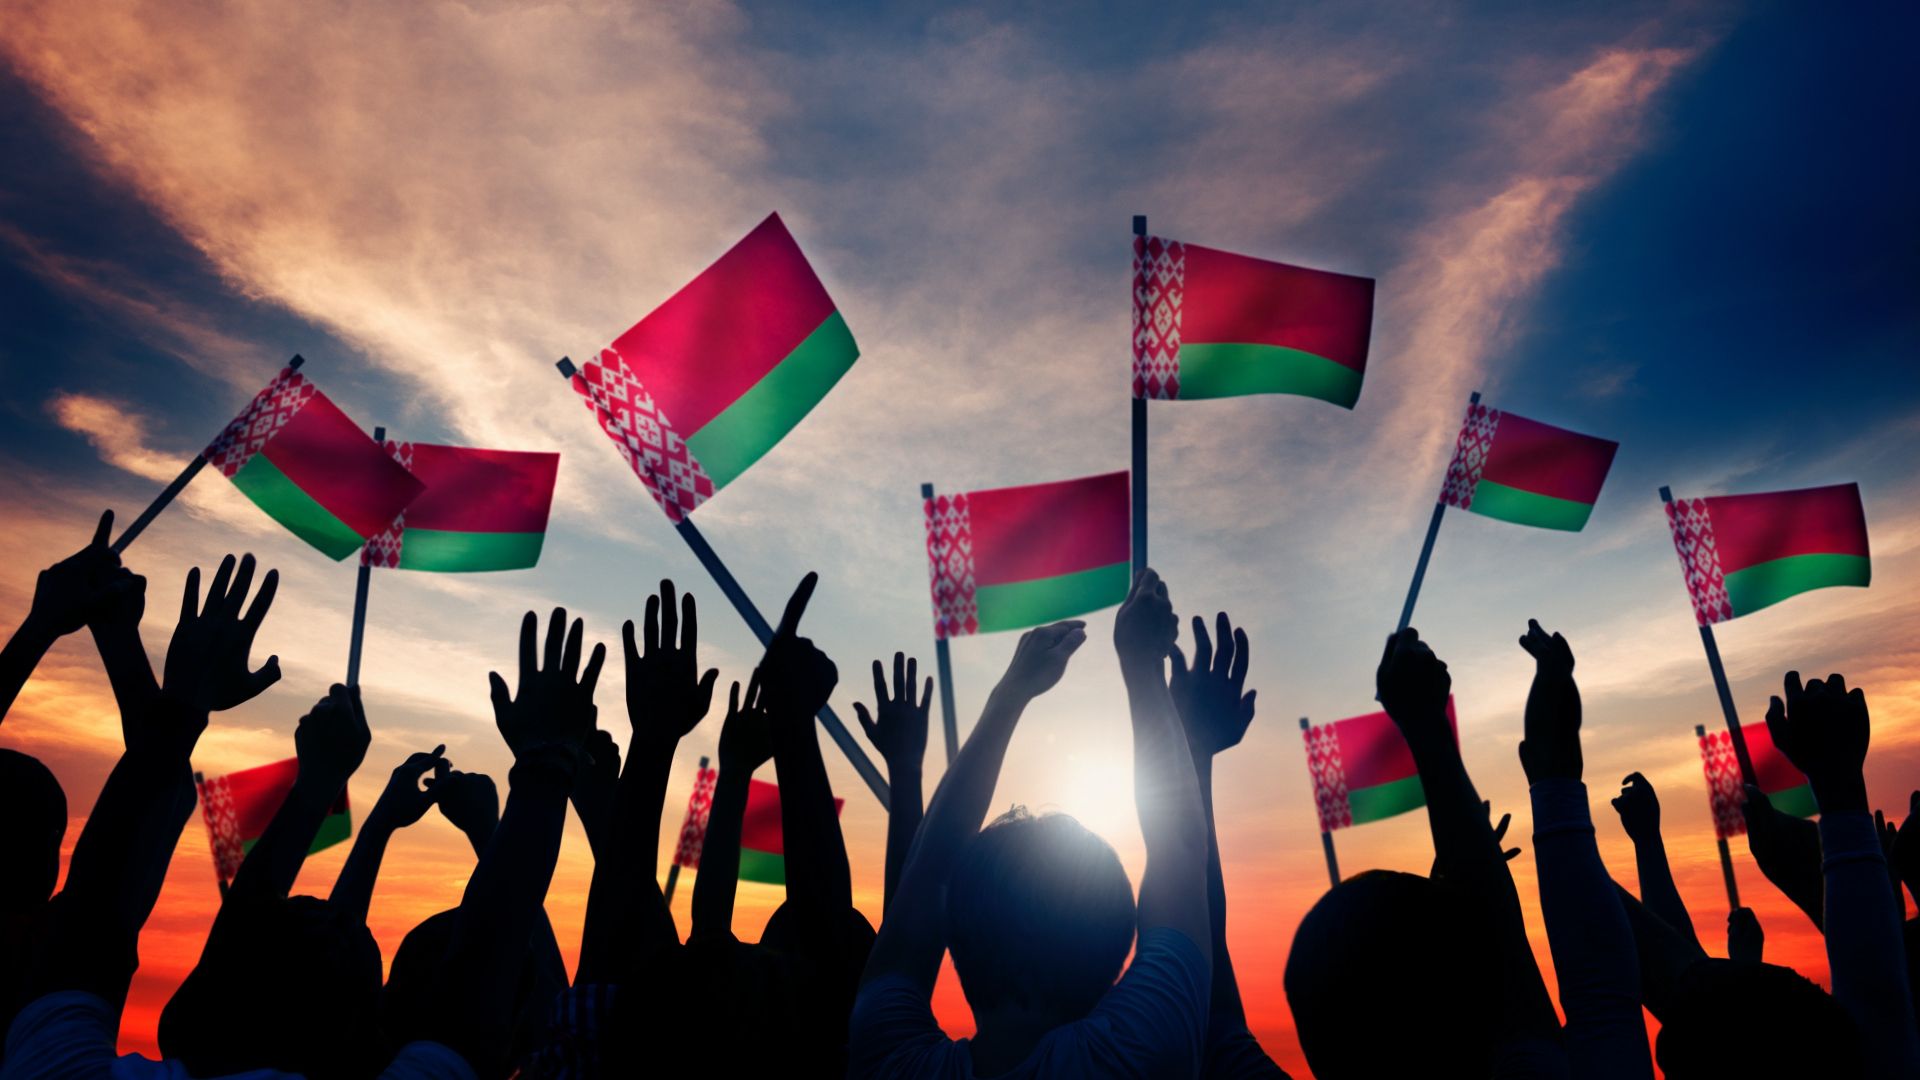 Hands raised up towards the sky holding Belarus flags